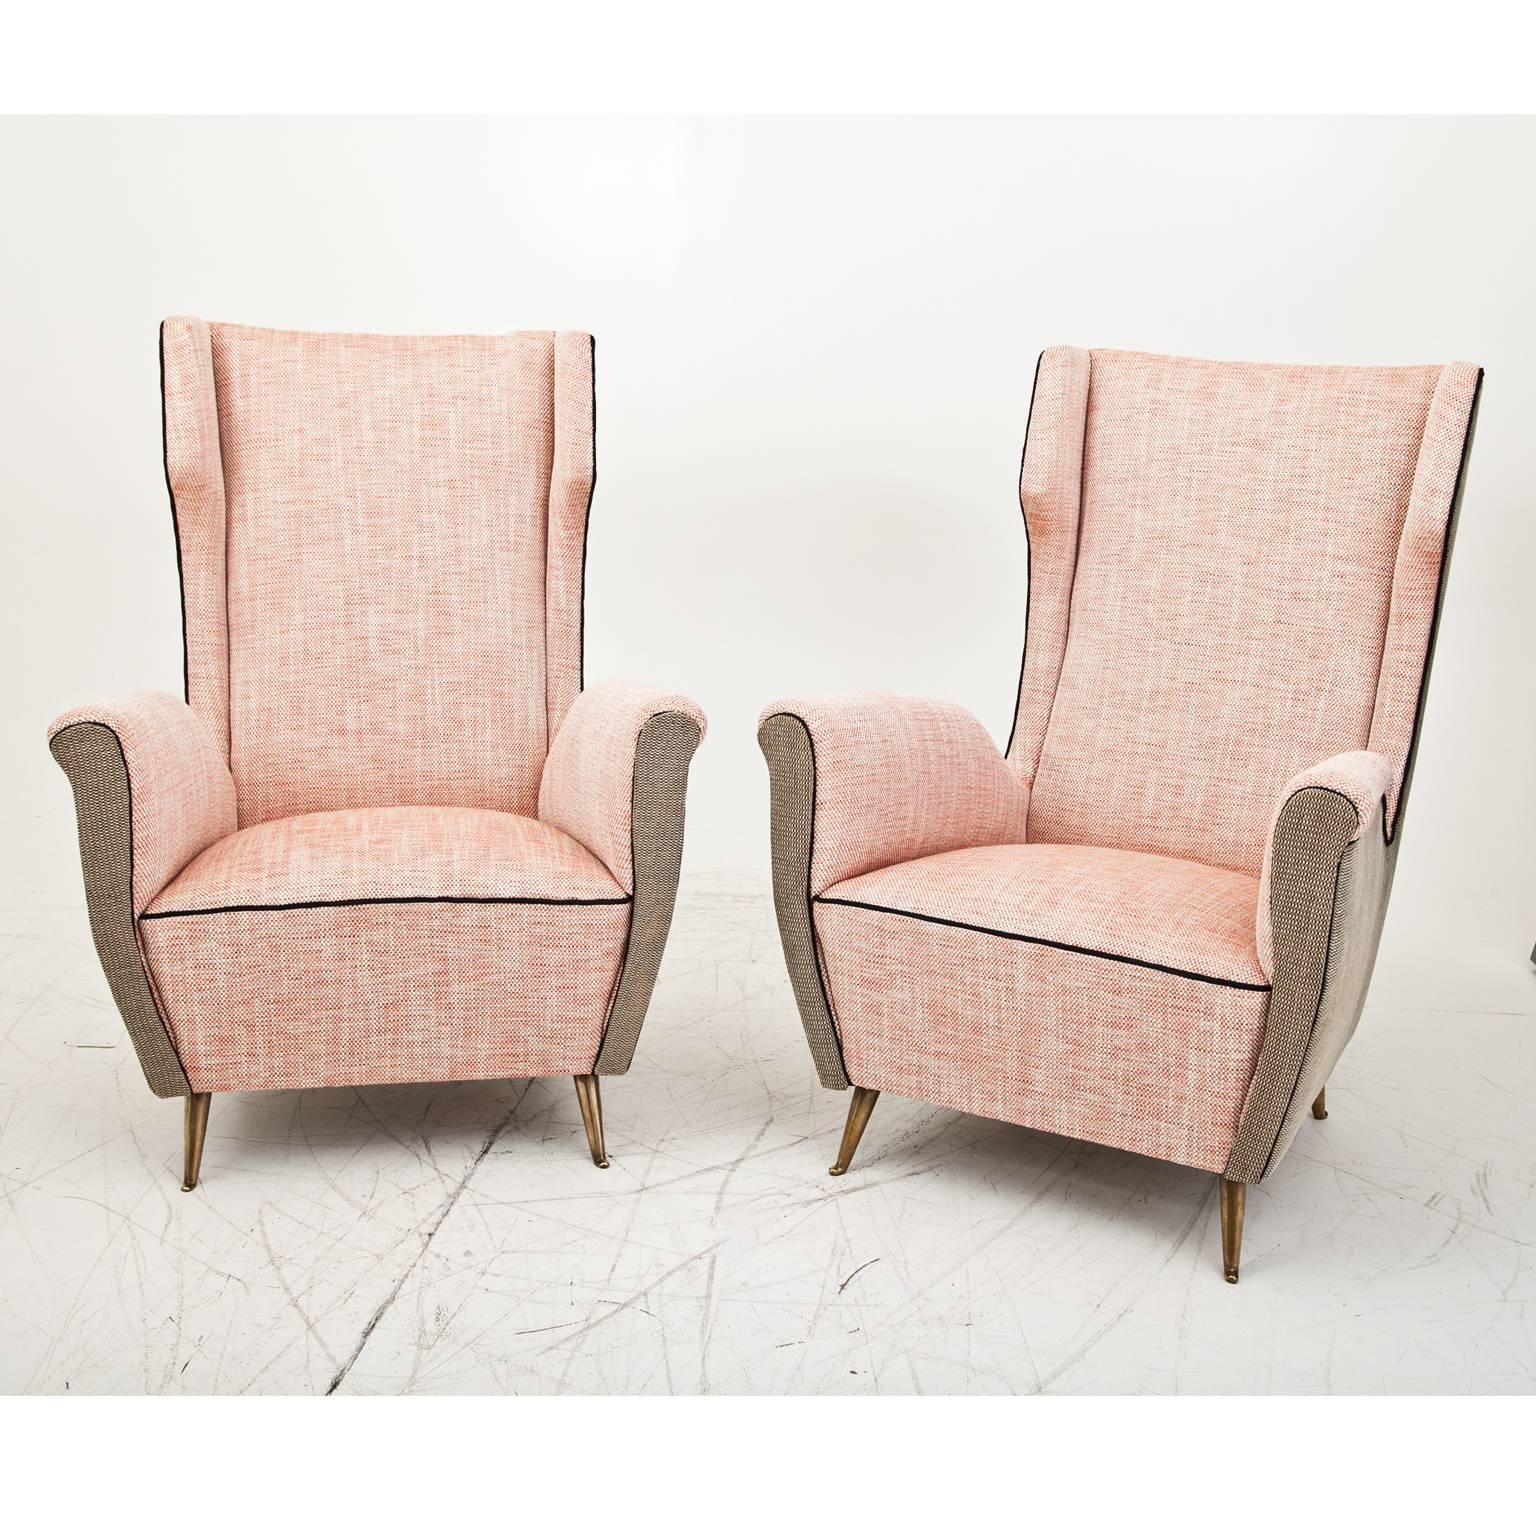 Pair of armchairs on brass feet with high backrests and slightly curved armrests. The chairs are reupholstered with a new, high quality fabric.